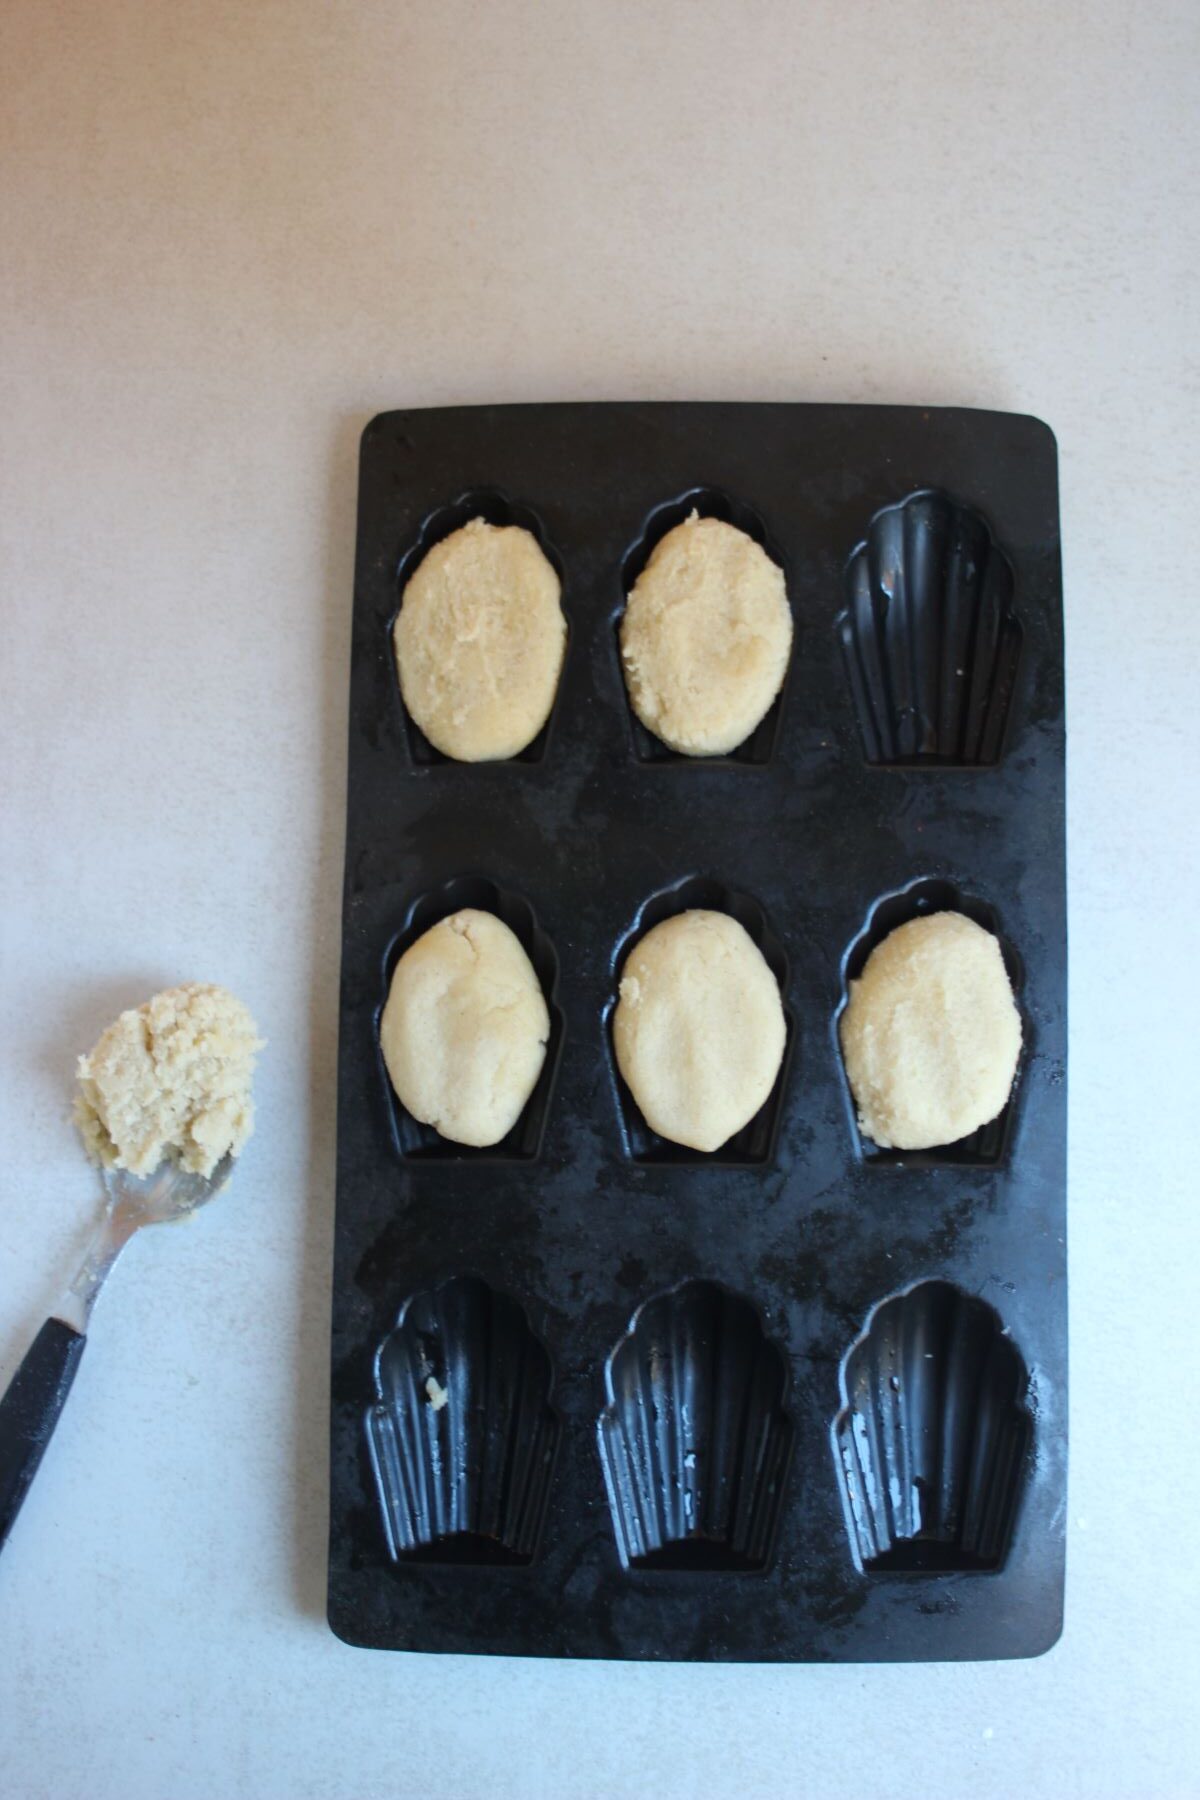 Silicone madeleine pan, some holes with dough, and a spoon with dough on the side.